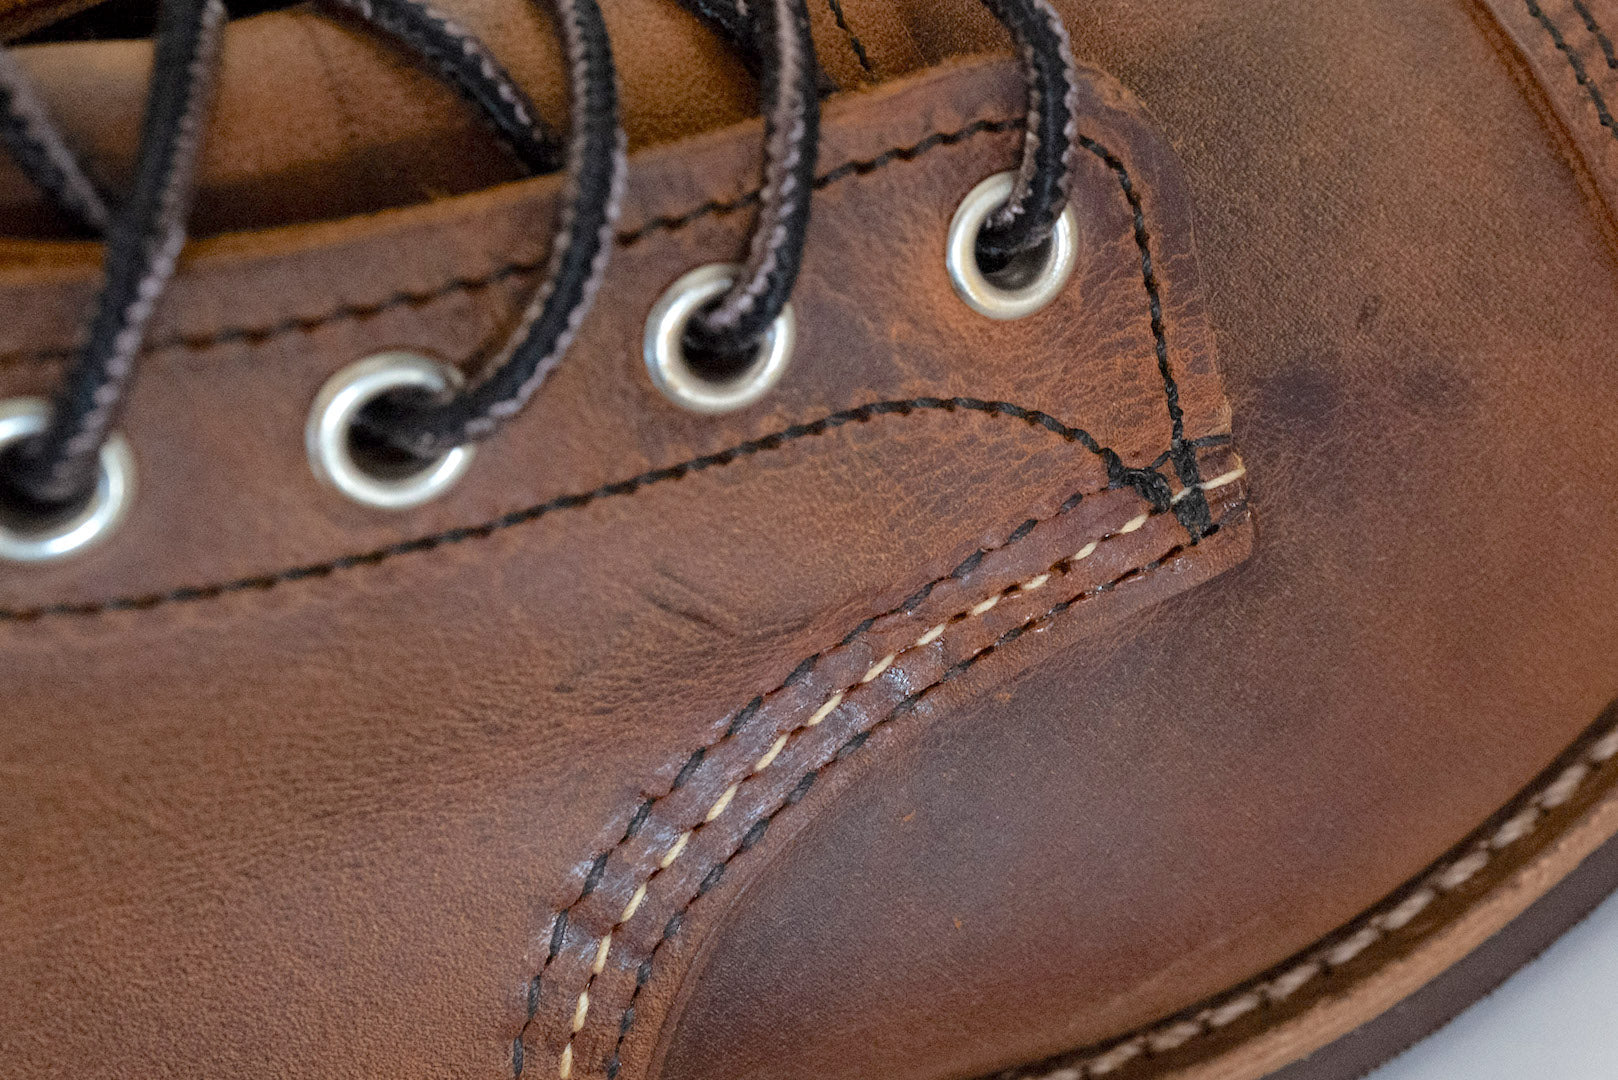 Red Wing Boots 8085